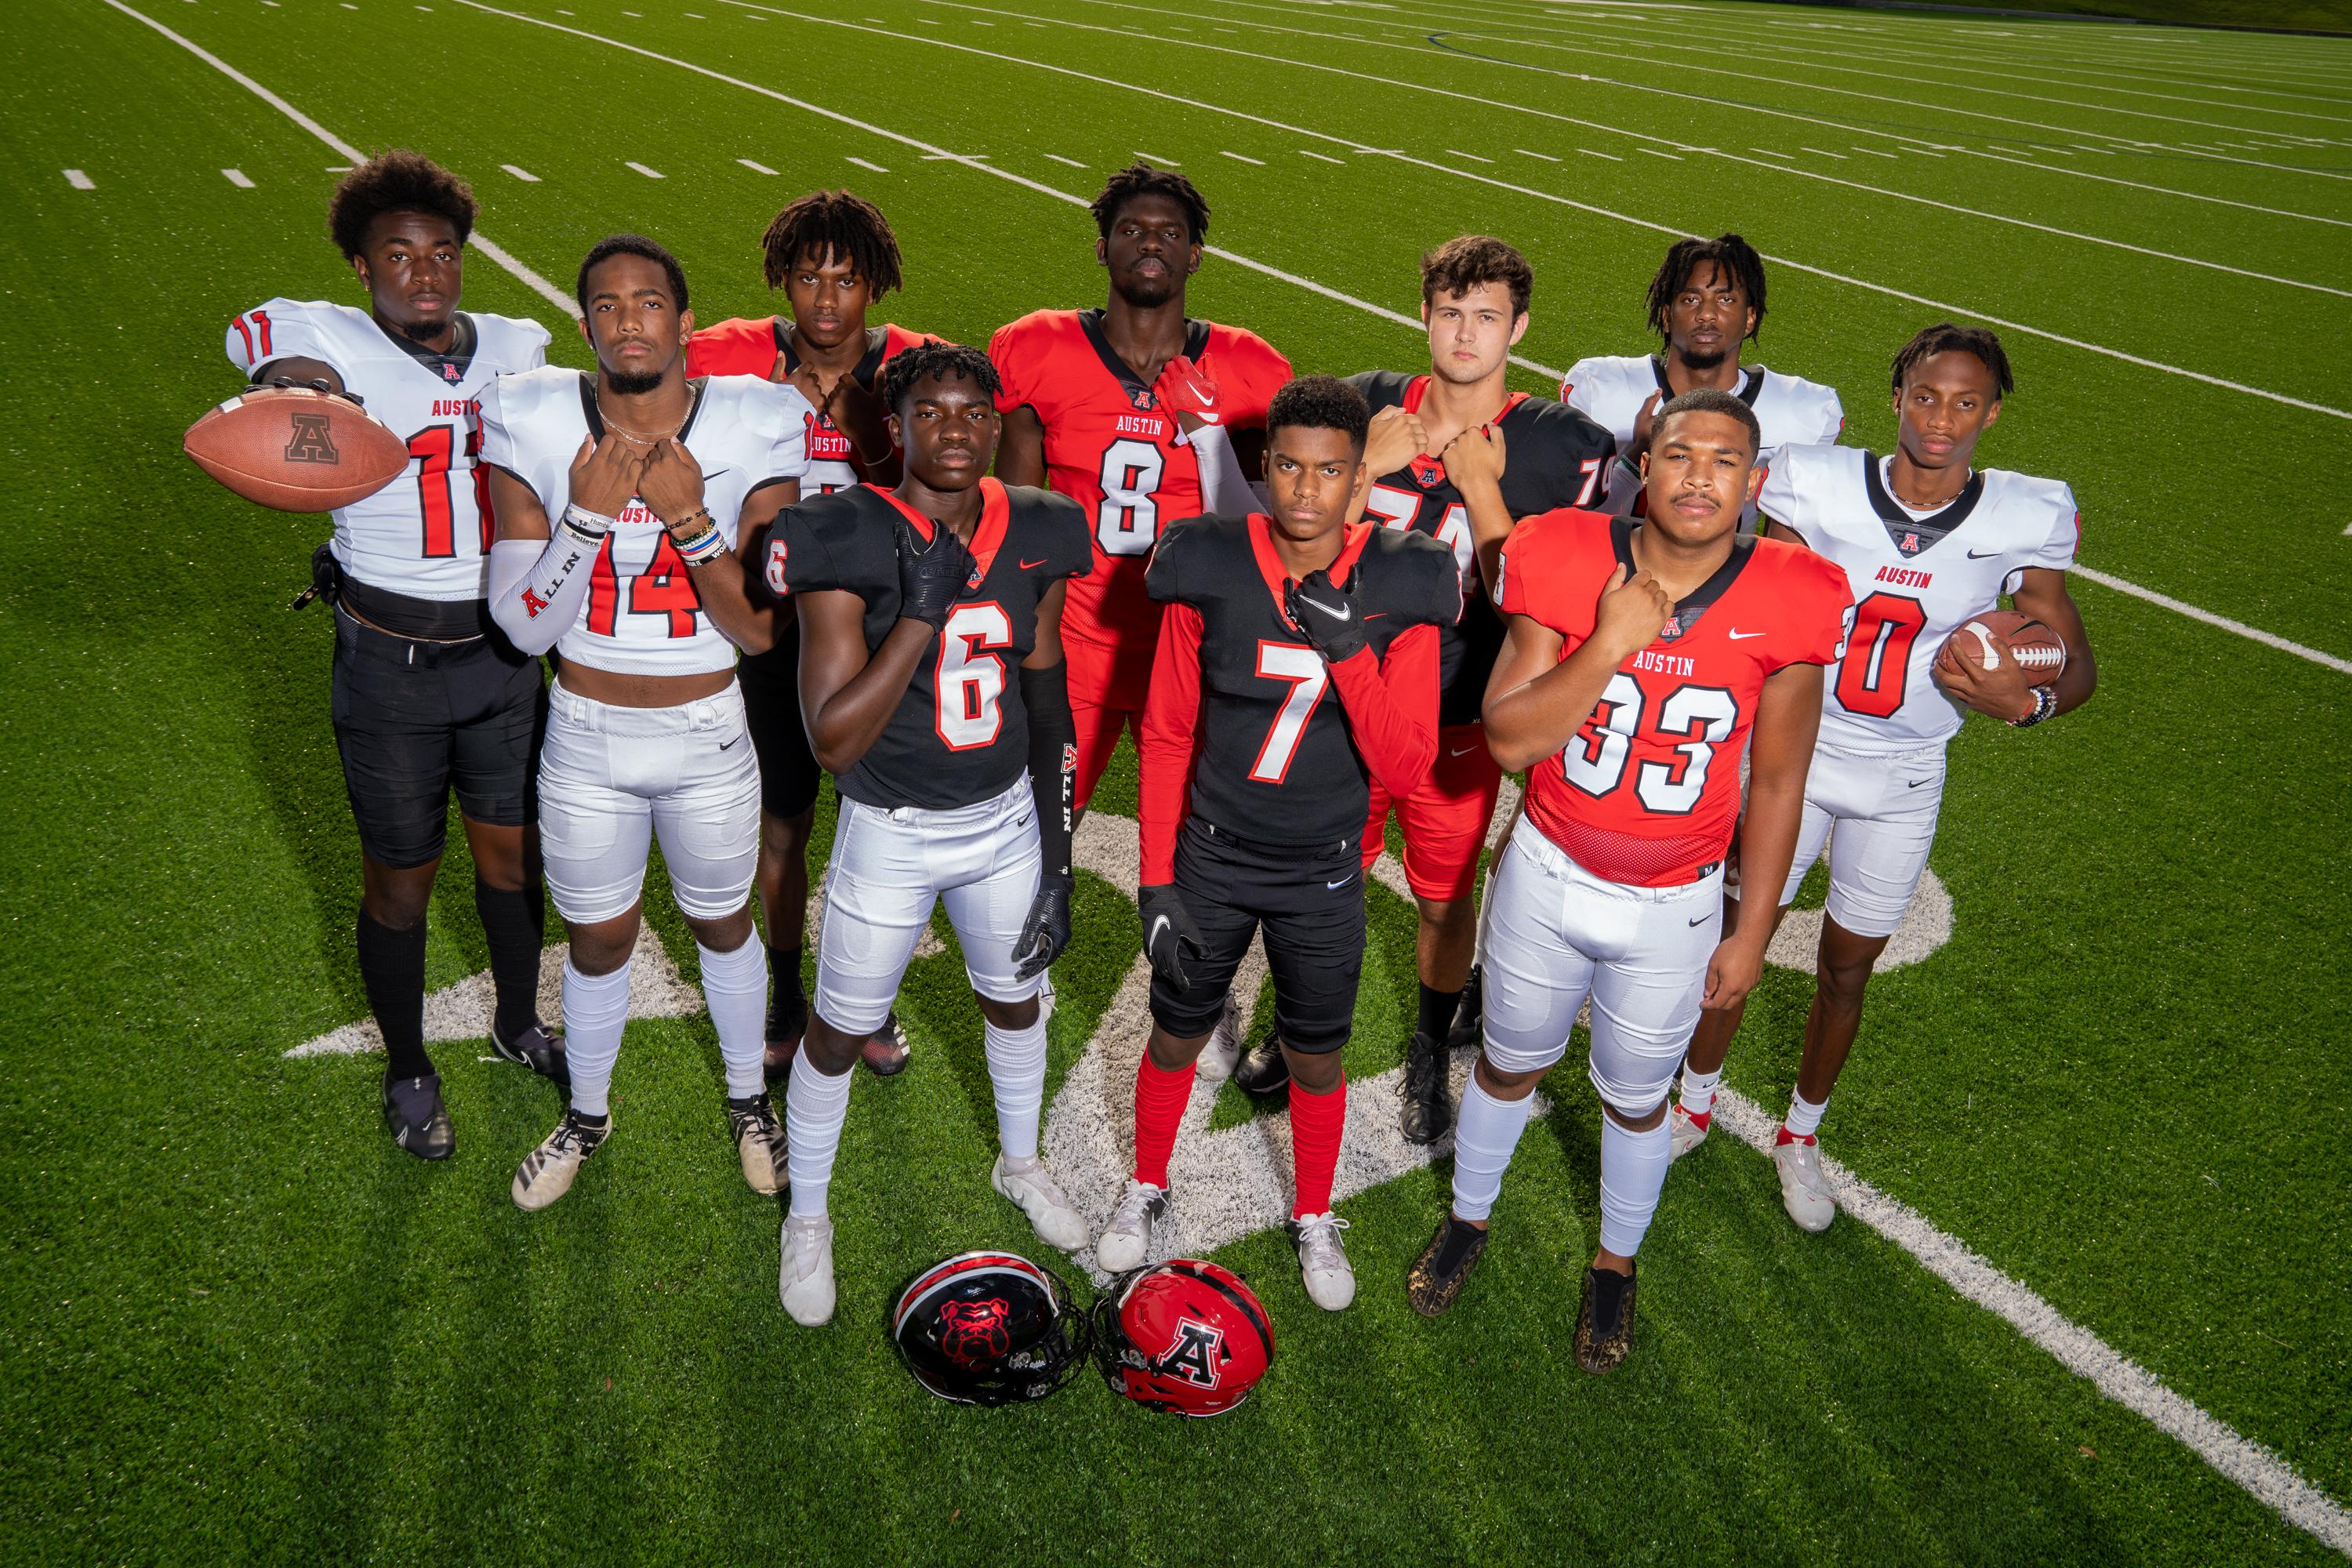 Culture key to Fort Bend Austin's 2-0 start - VYPE